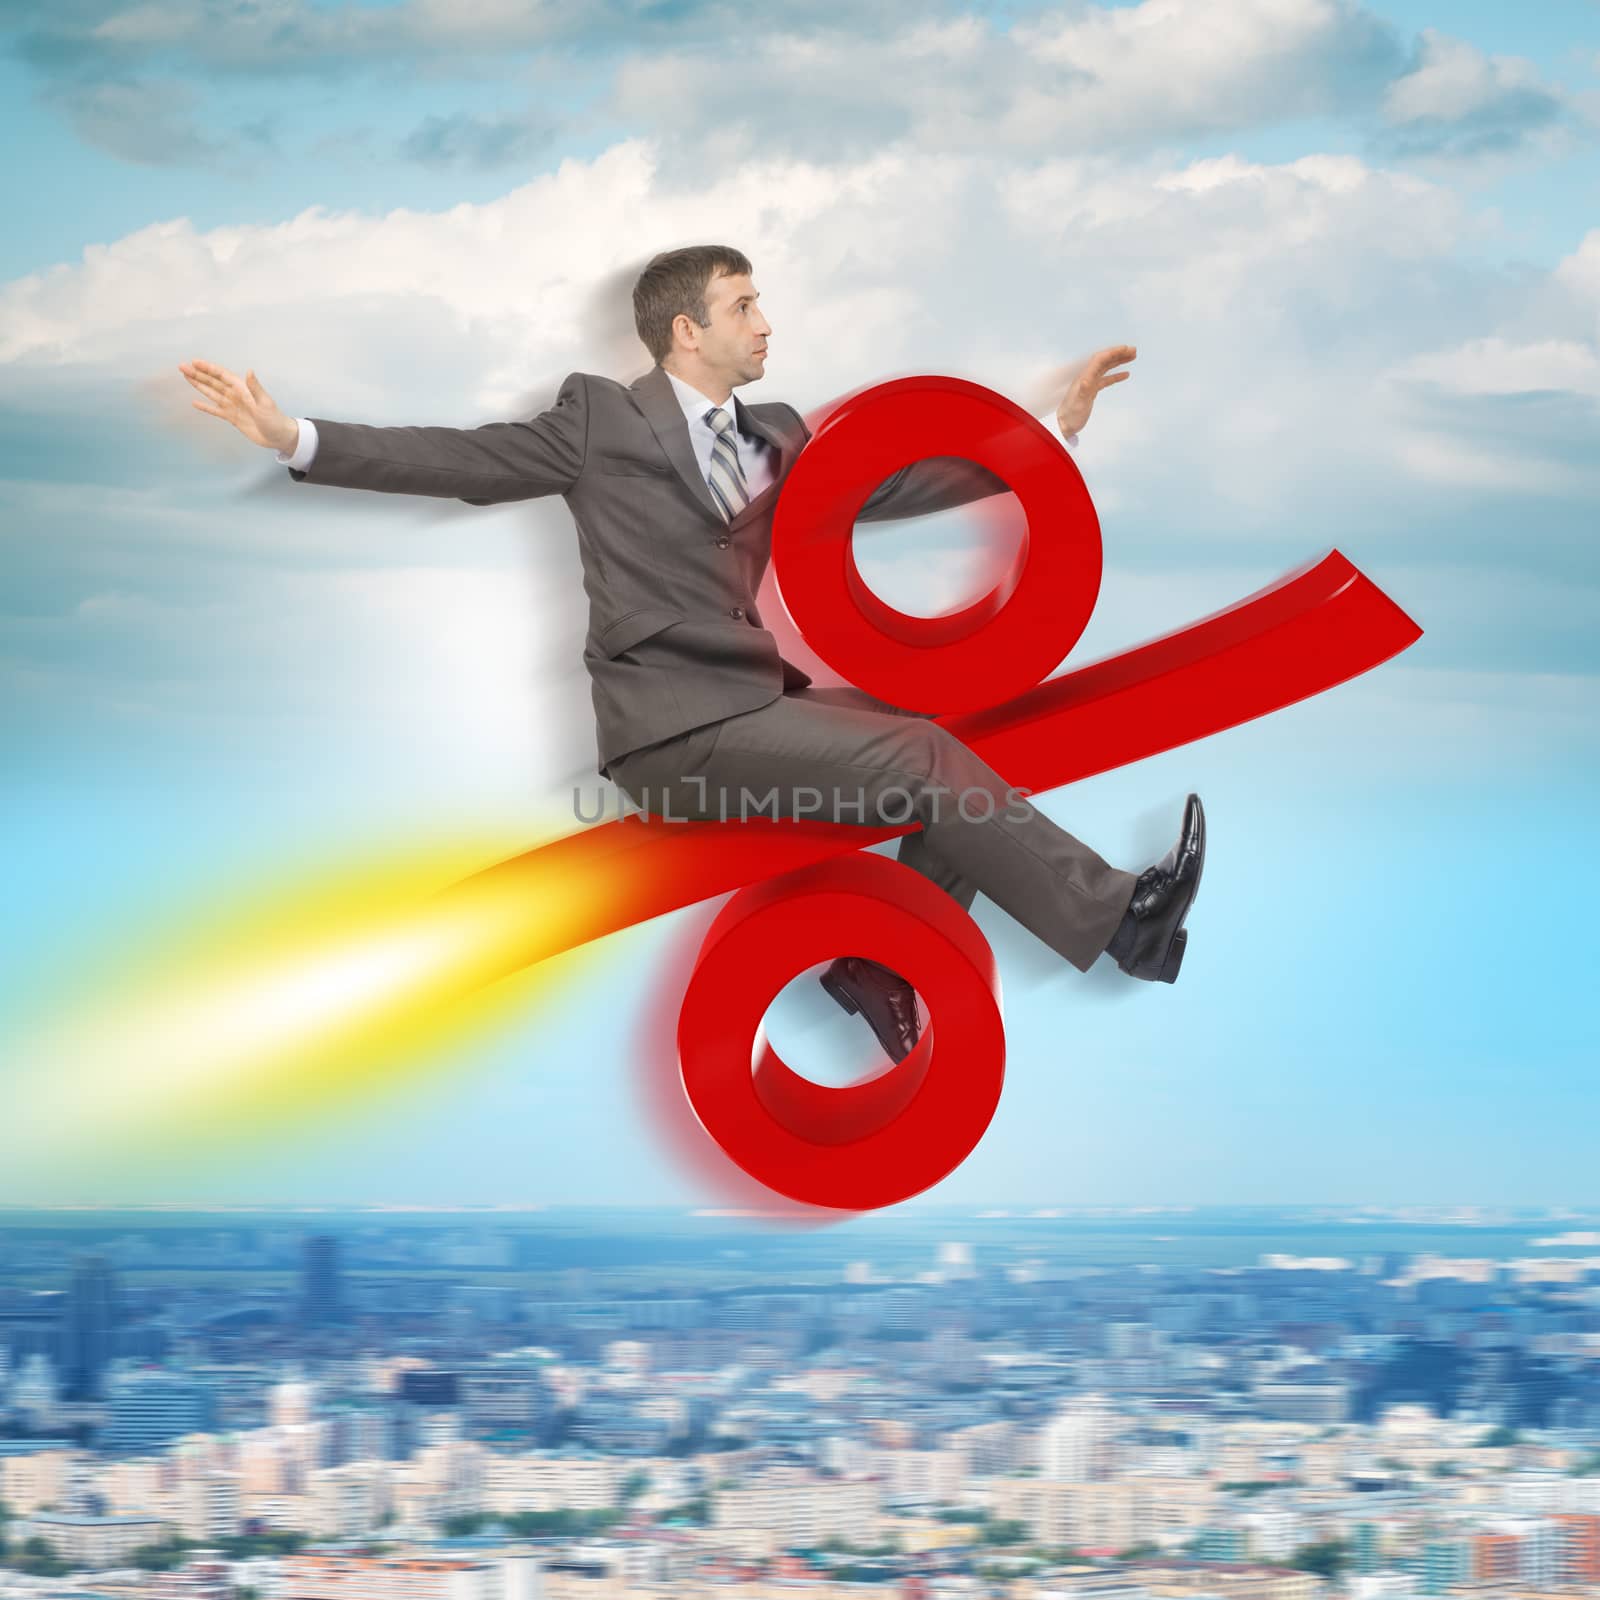 Businessman flying on percent sign above city